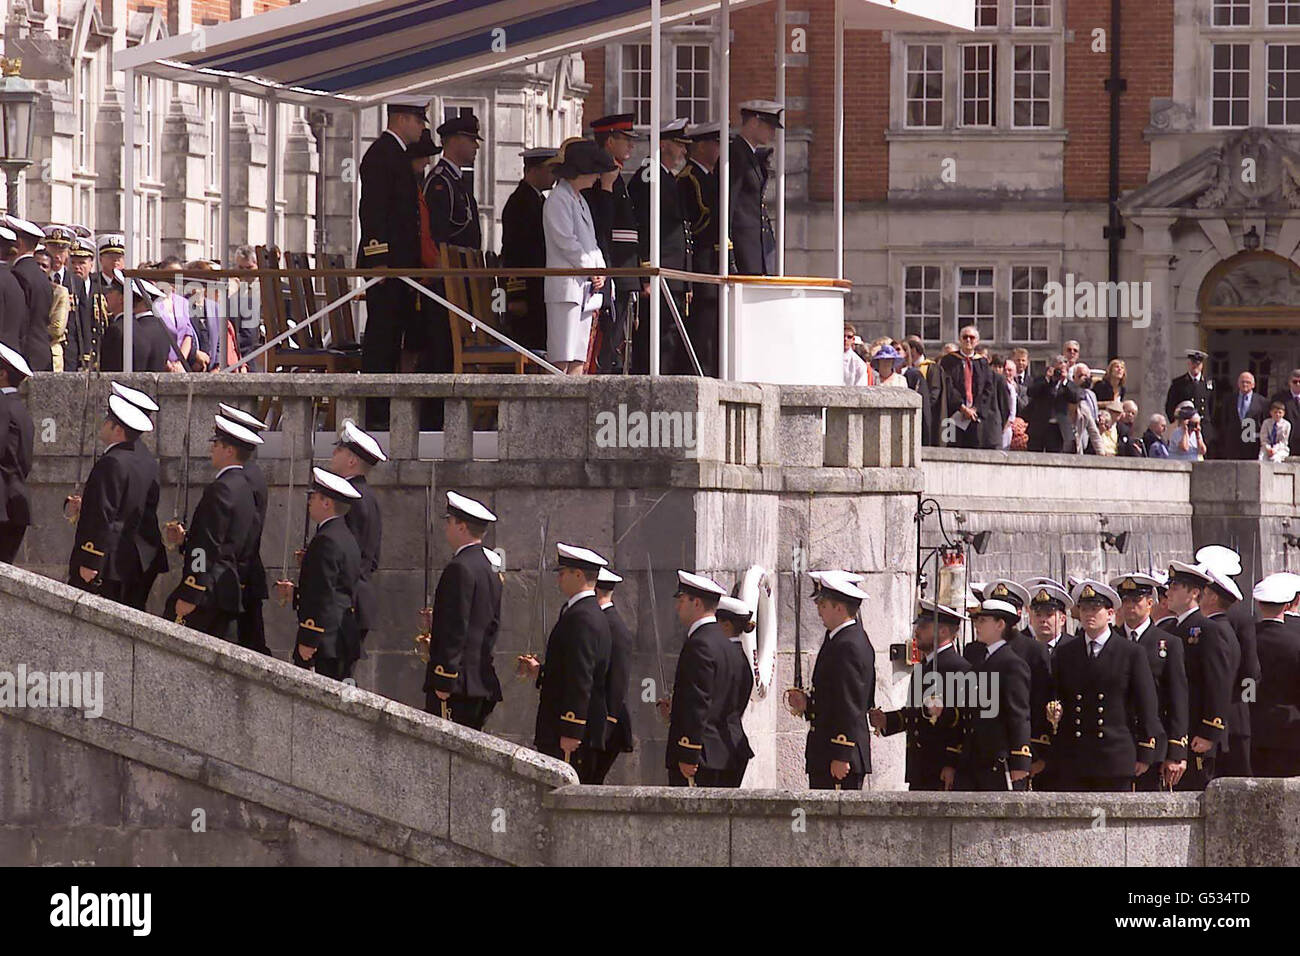 His Royal Highness Crown Prince Haakon of Norway (at front of podium) takes the salute at the Britannia Royal Navy College in Dartmouth, Devon. Known as the Lord High Admiral's Divisions, it marks the passing out of officers before being assigned to their ships. * Normally Her Majesty the Queen of England or a member of the British royal family attends the event, but this year they have been kept away by the 100th birthday celebrations of the Queen Mother. Stock Photo